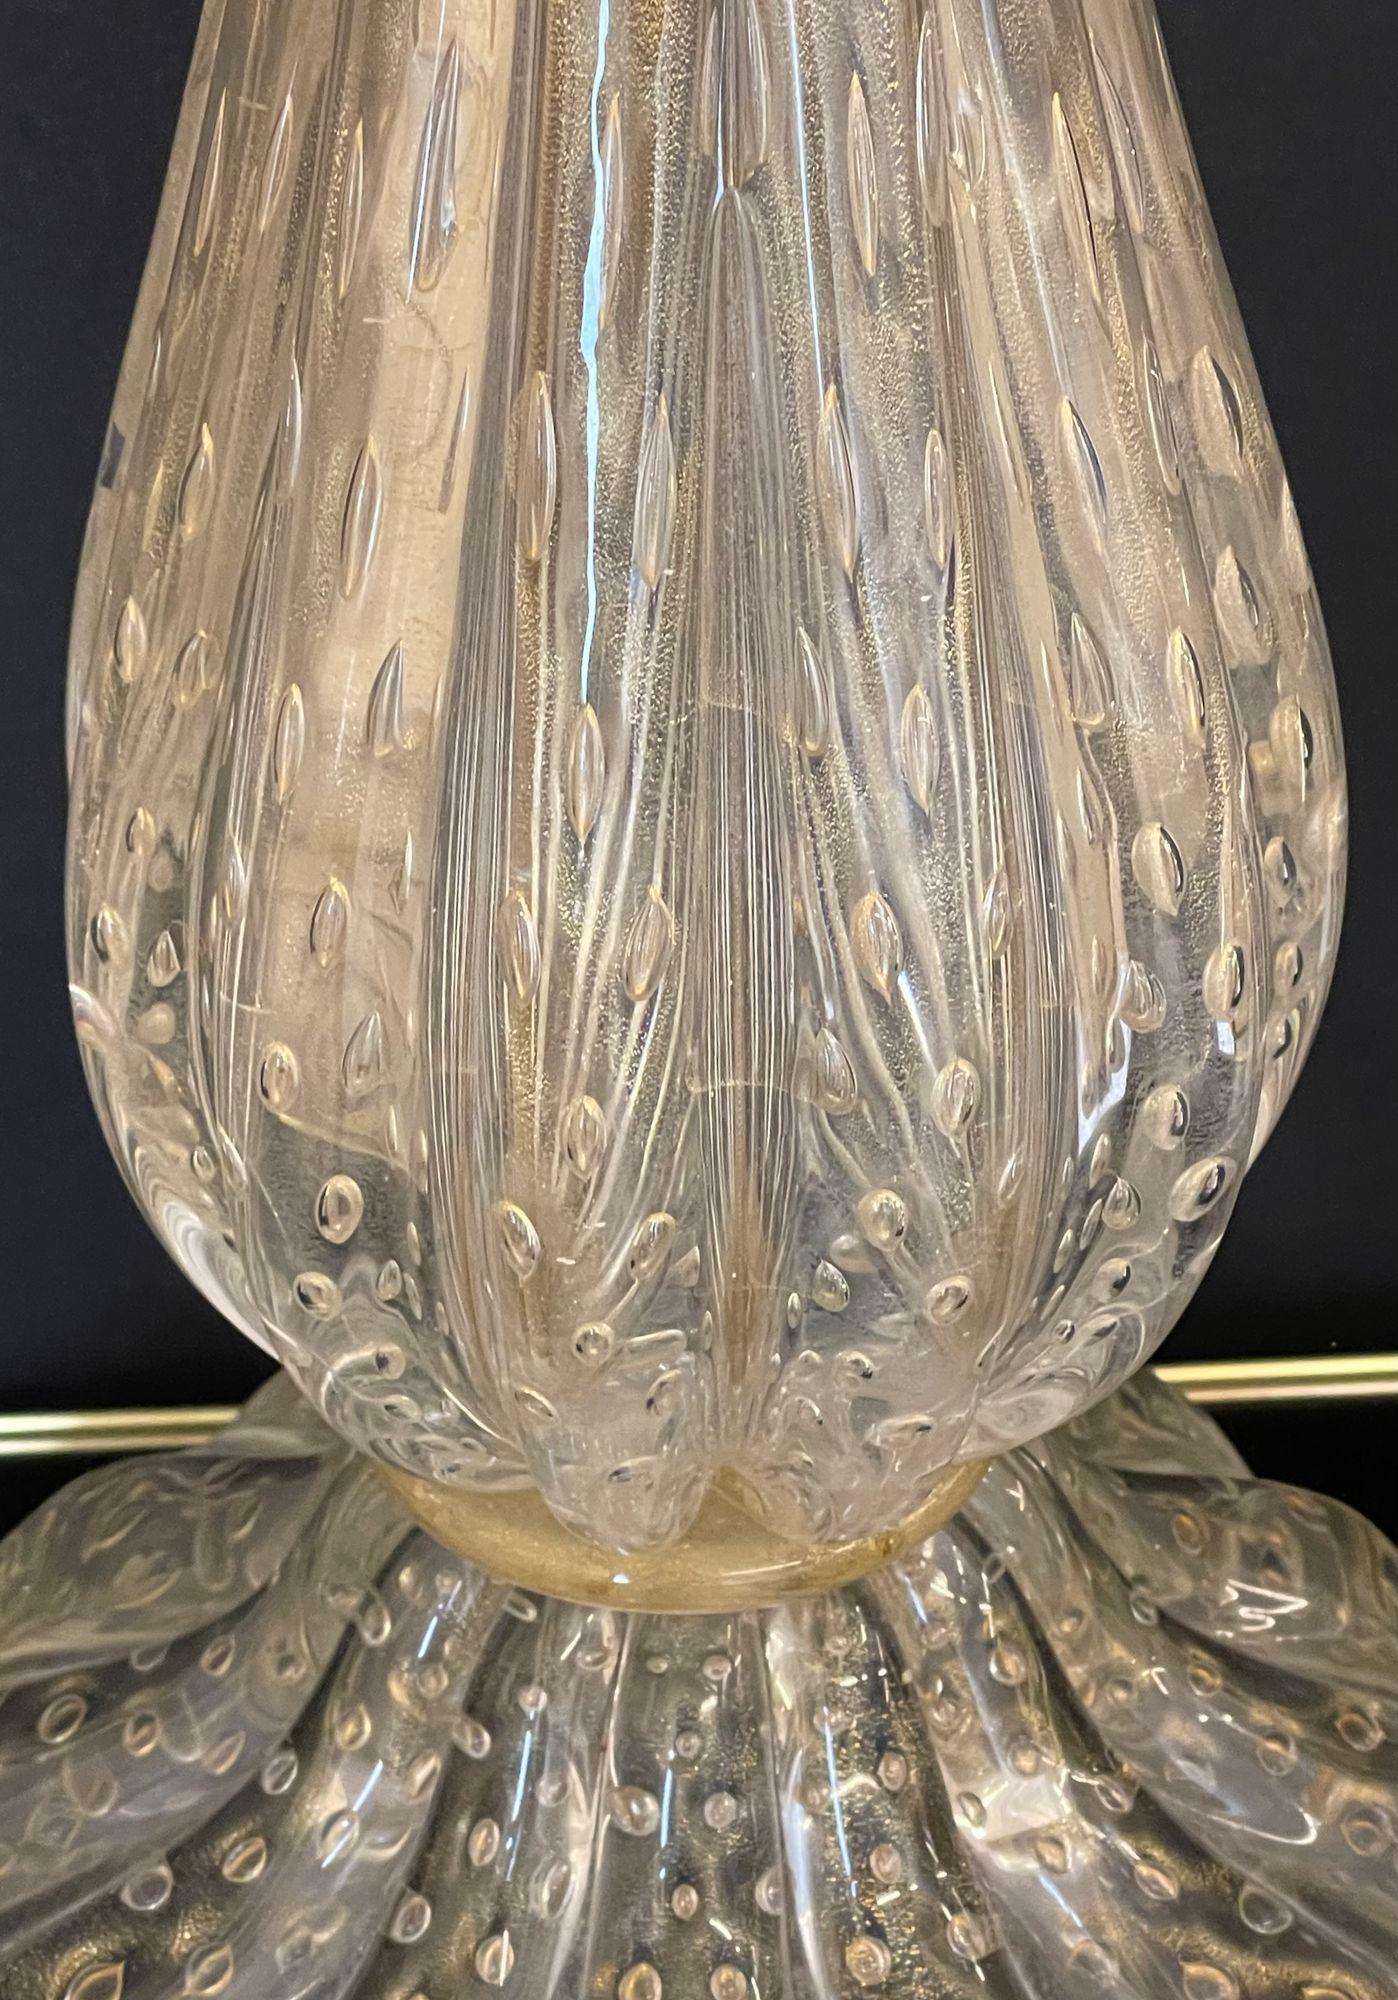 Large Italian Murano Glass Table Lamp, Mid-Century Modern, Barovier Toso Style For Sale 4